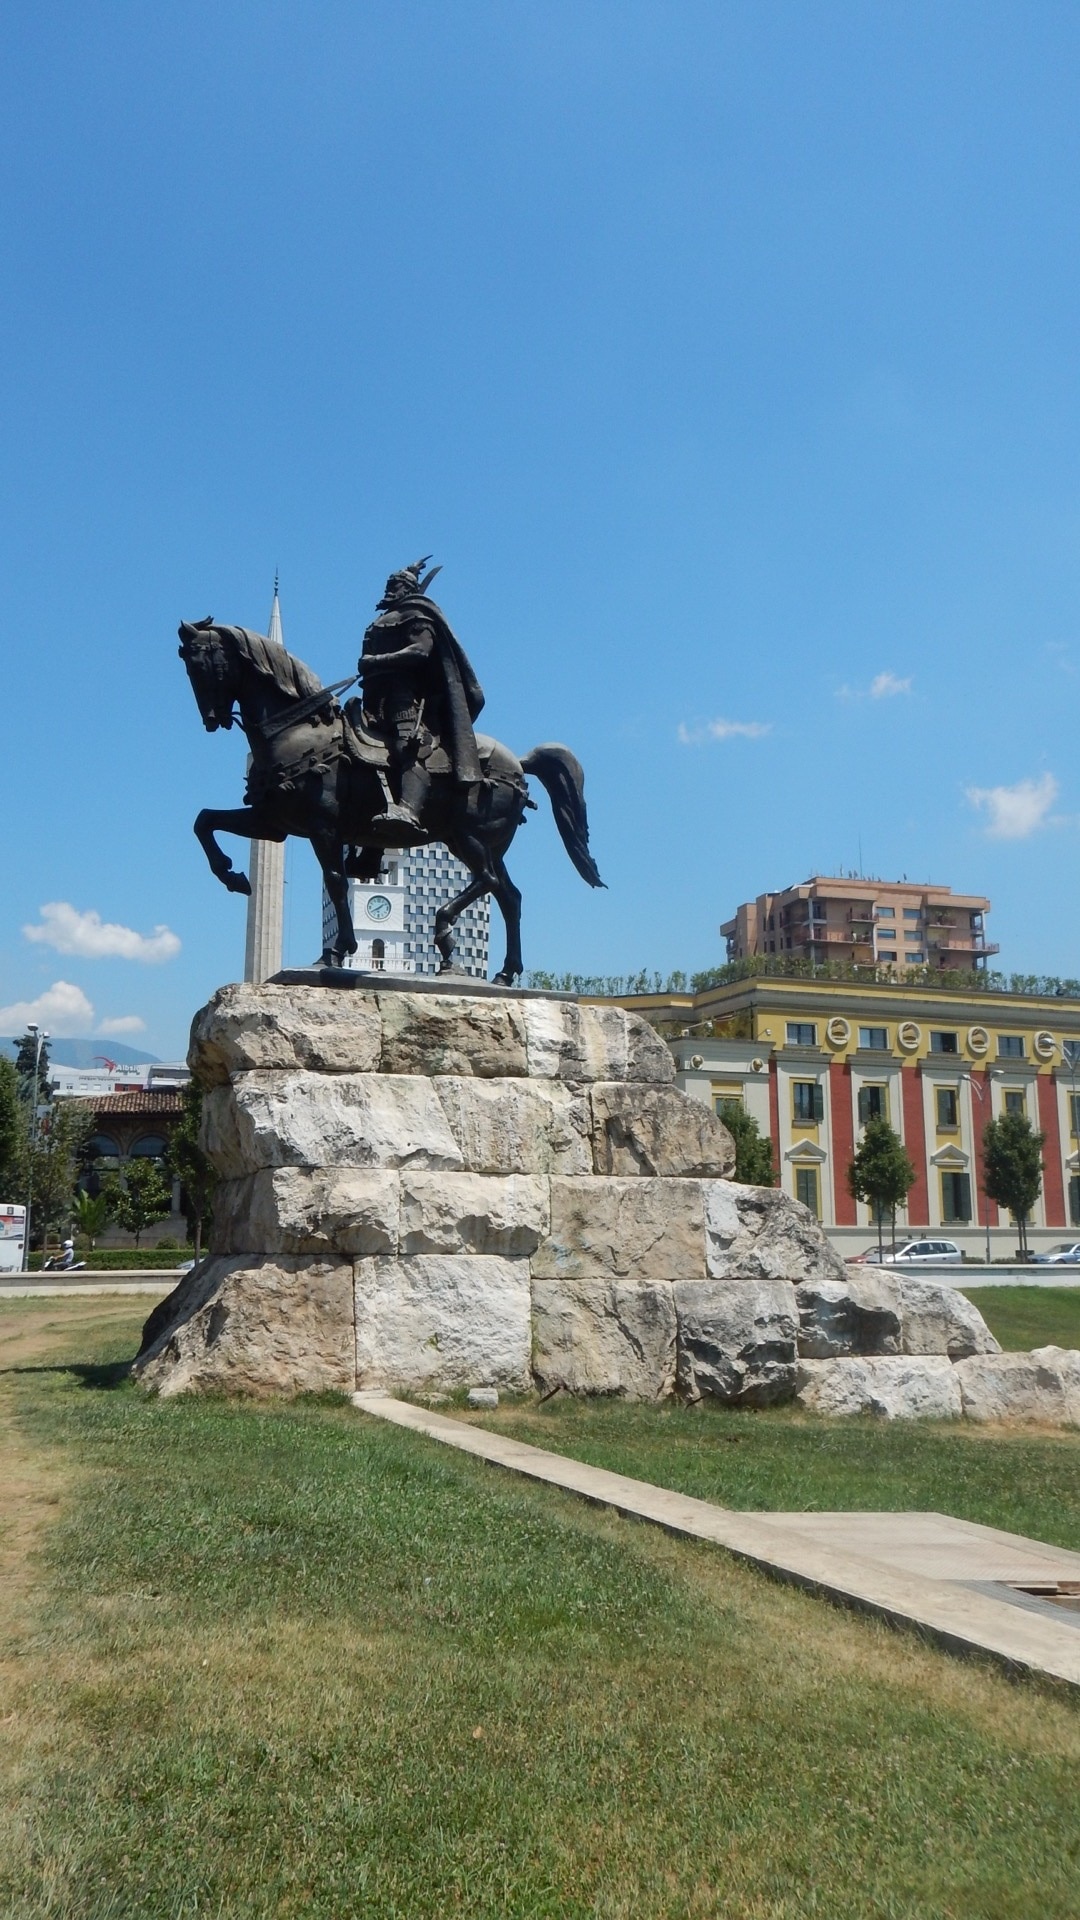 Skanderbeg Monument in Tirana - it's in the middle of a huge oval roundabout so a bit tricky playing chicken with the traffic to get to it! 